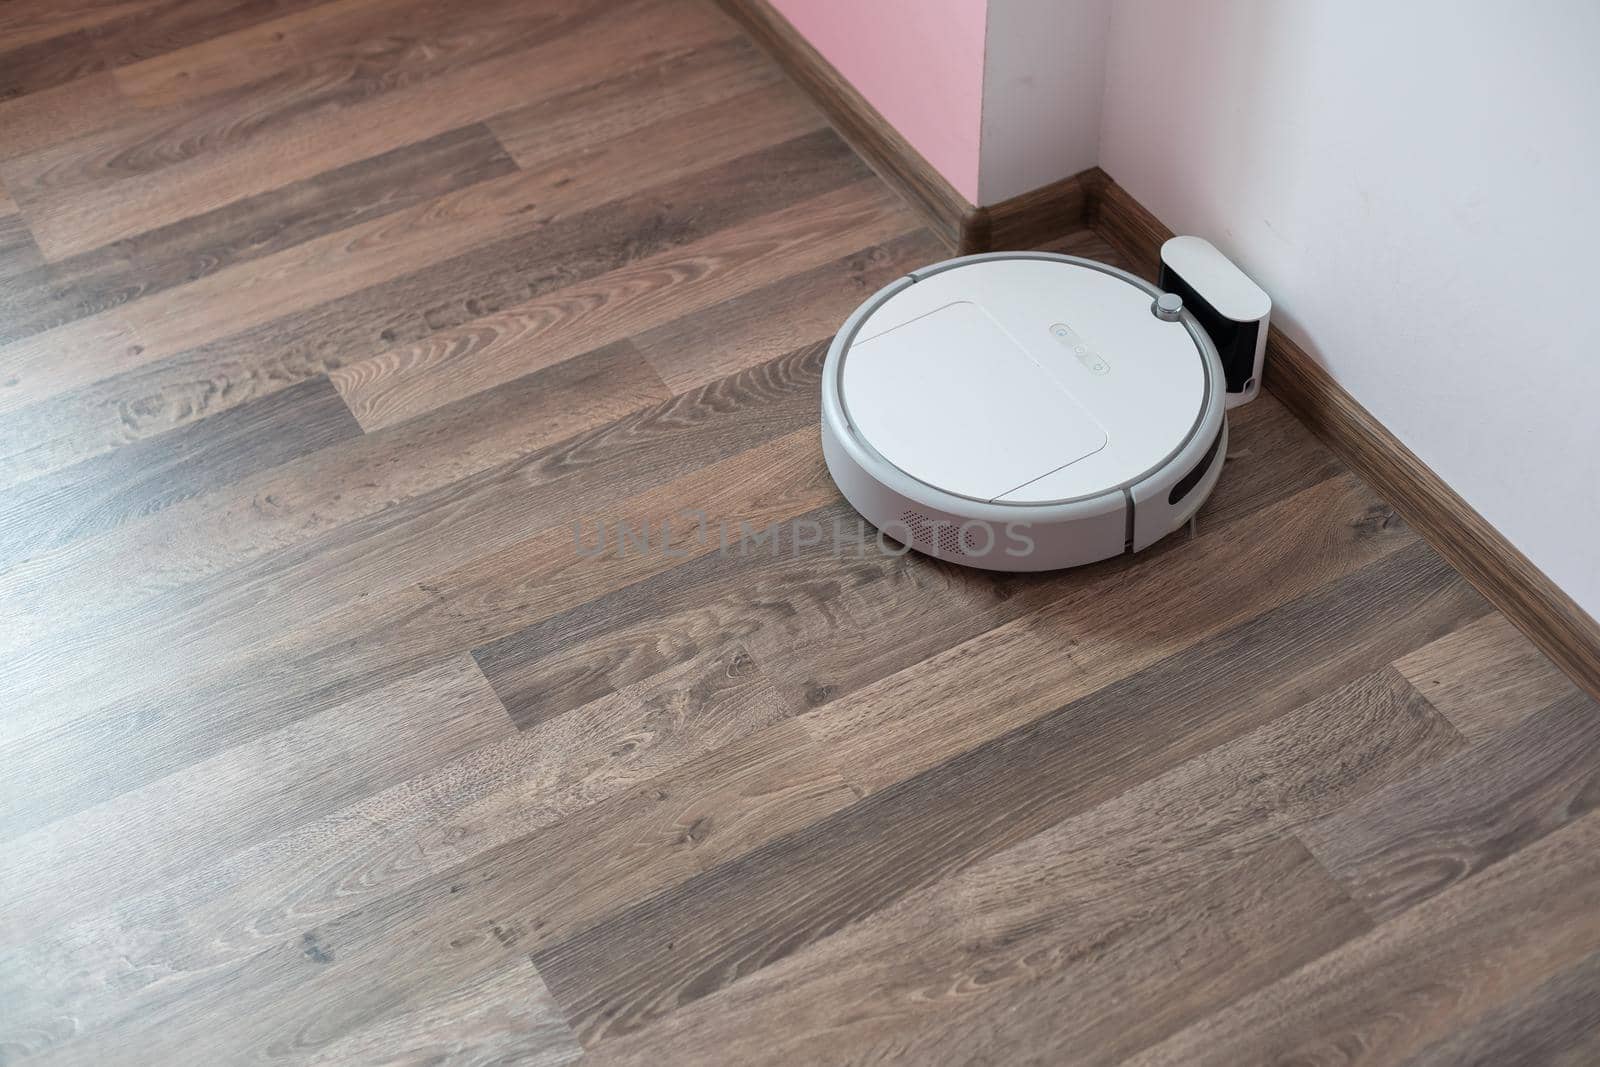 Robotic vacuum cleaner on laminate wood floor charging from base station. Smart cleaning technology. robot vacuum cleaner return to charging at dock in clean room floor.